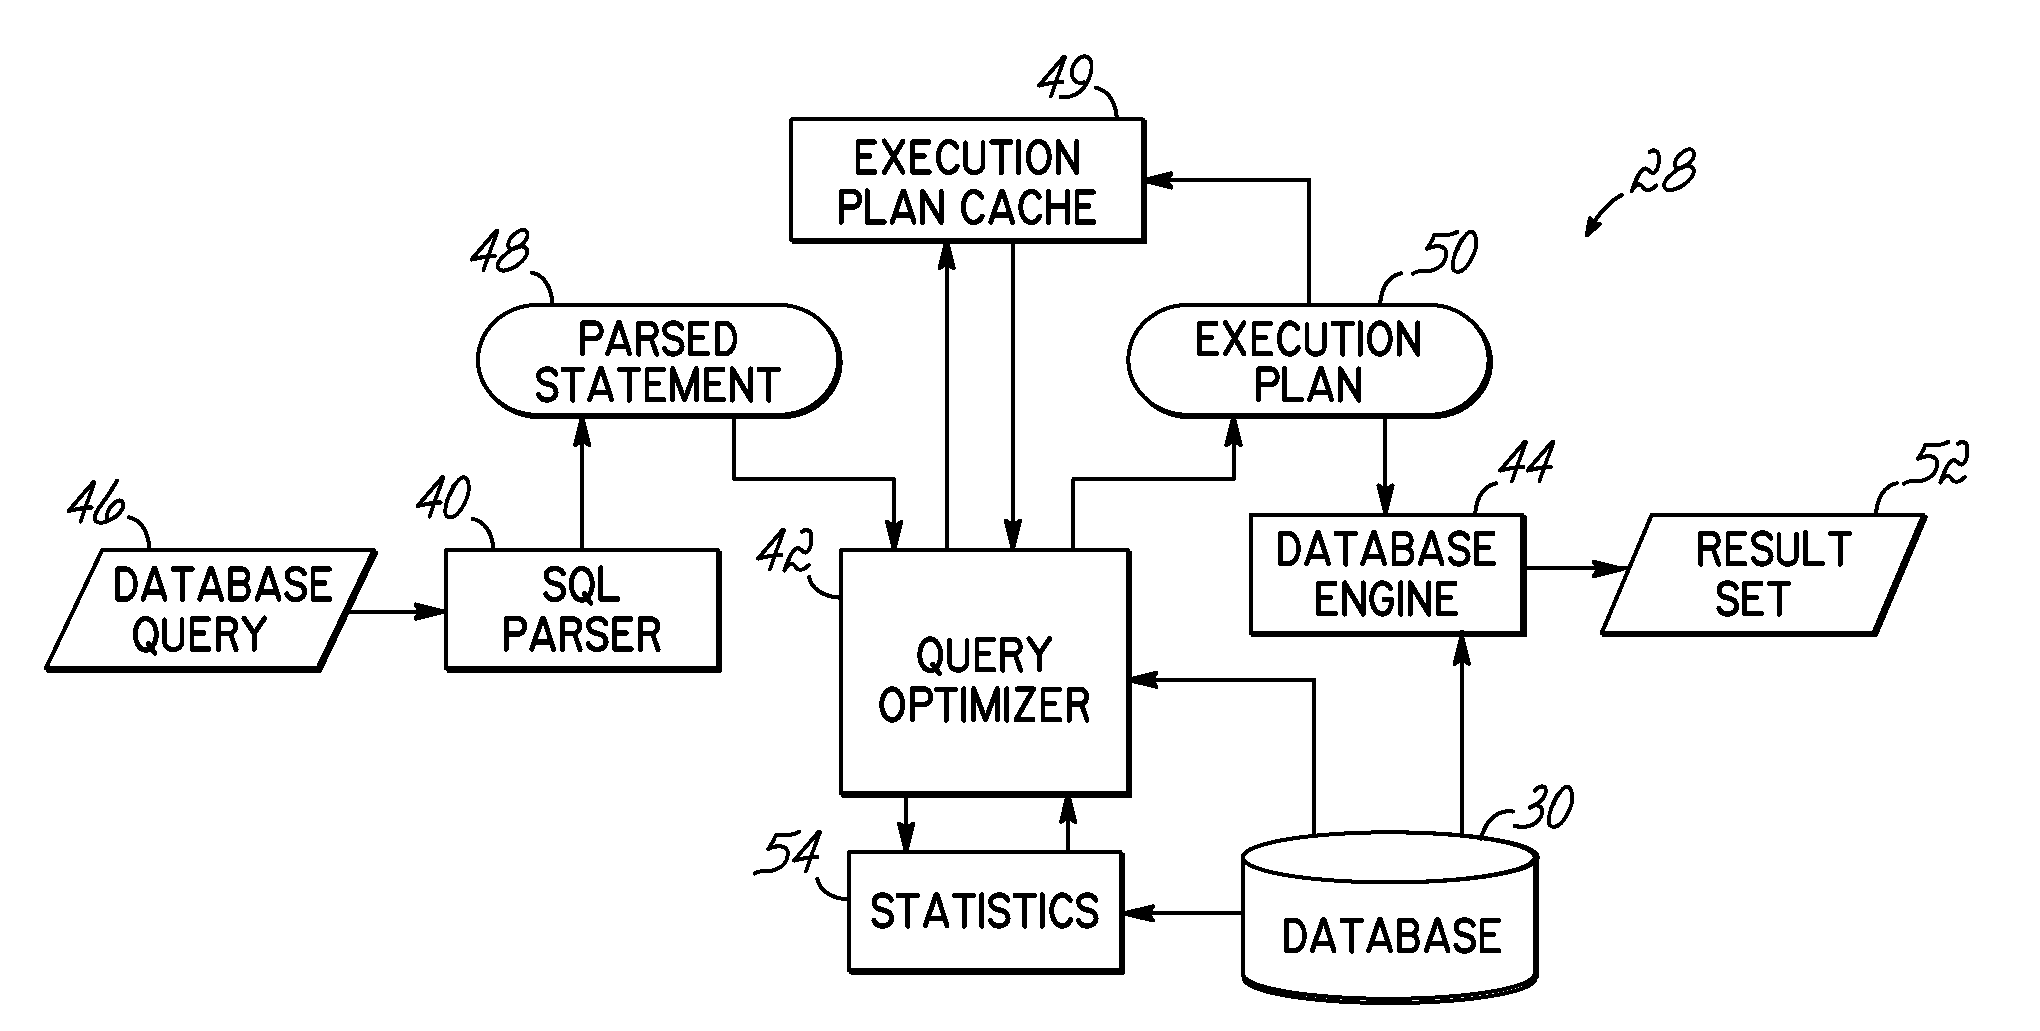 Expression tree data structure for representing a database query